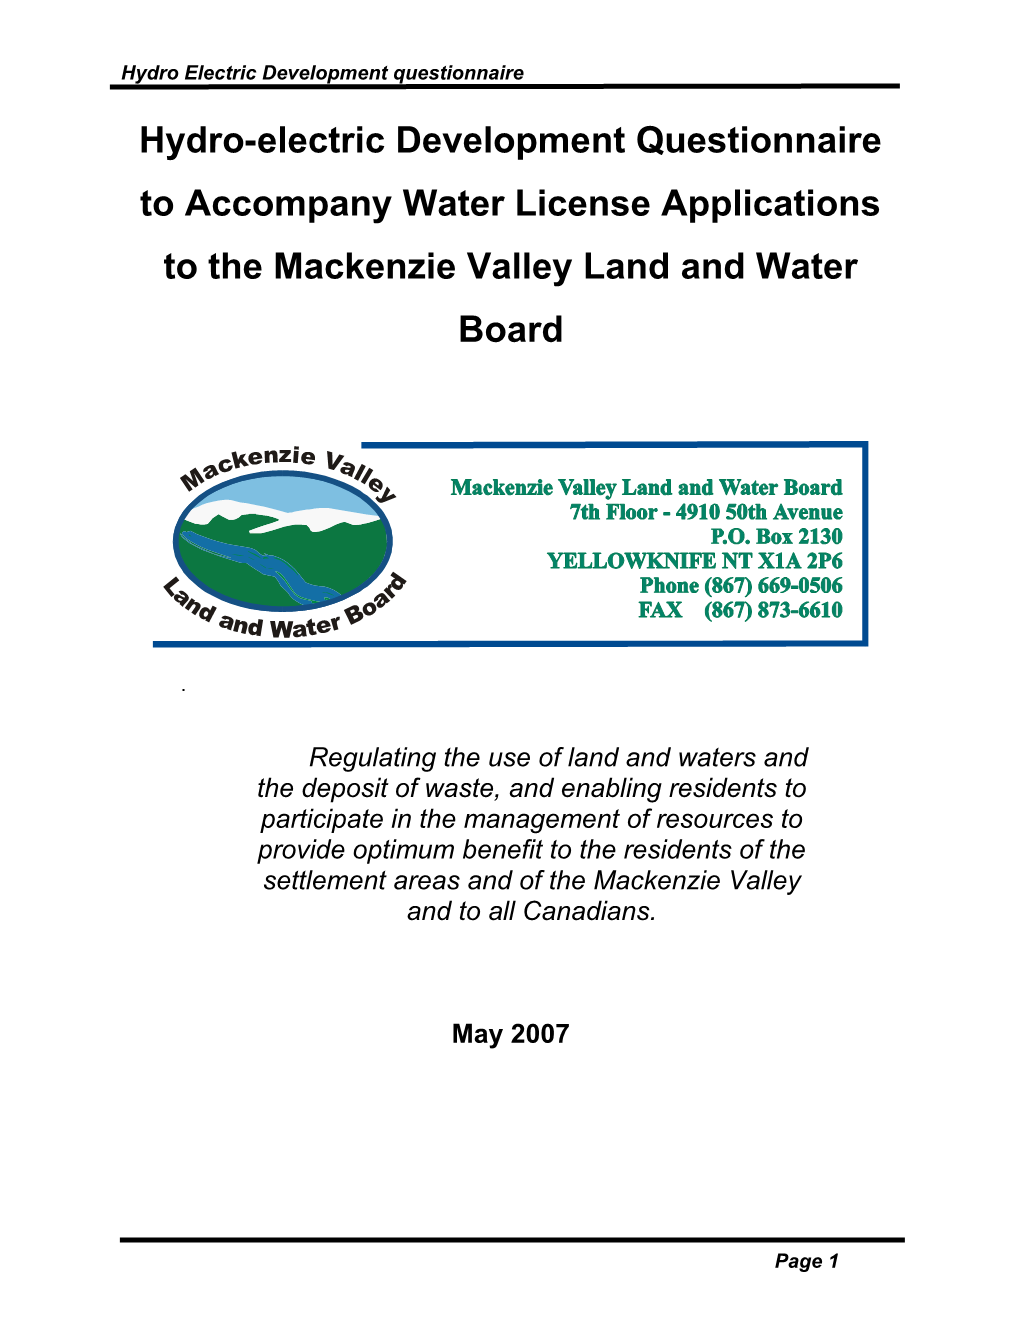 Hydro-Electric Development Questionnaire to Accompany Water Licence Applications to The